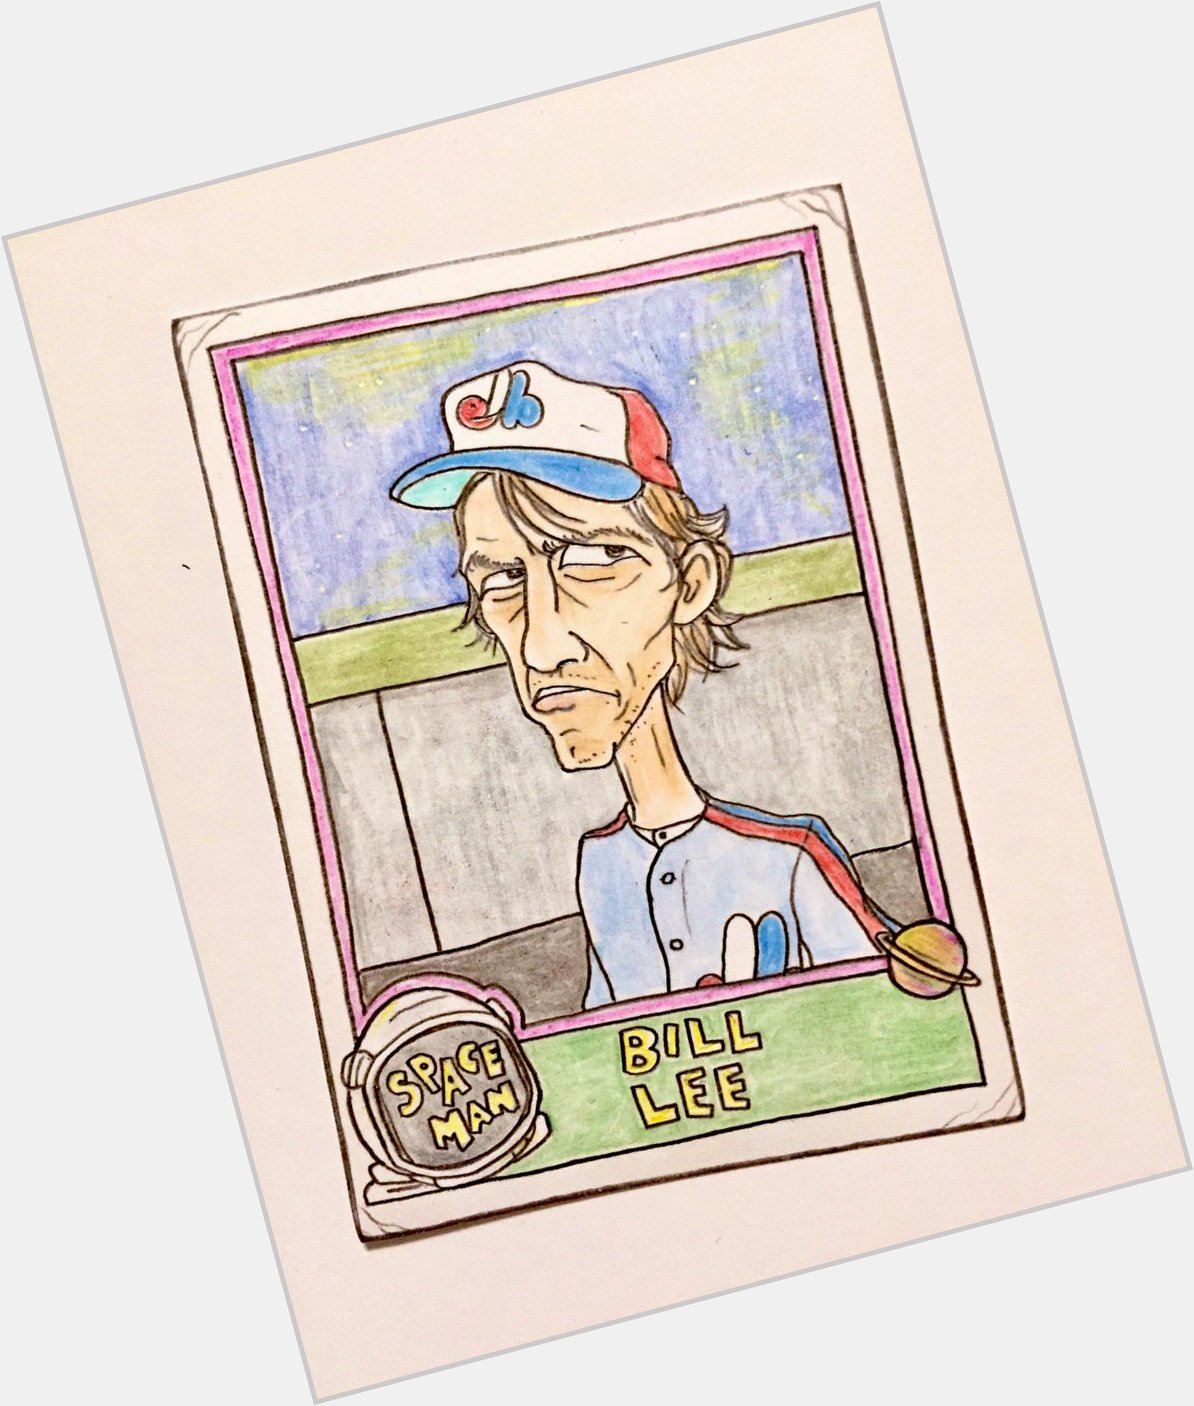 Wishing a happy 75th birthday to Spaceman Bill Lee! 